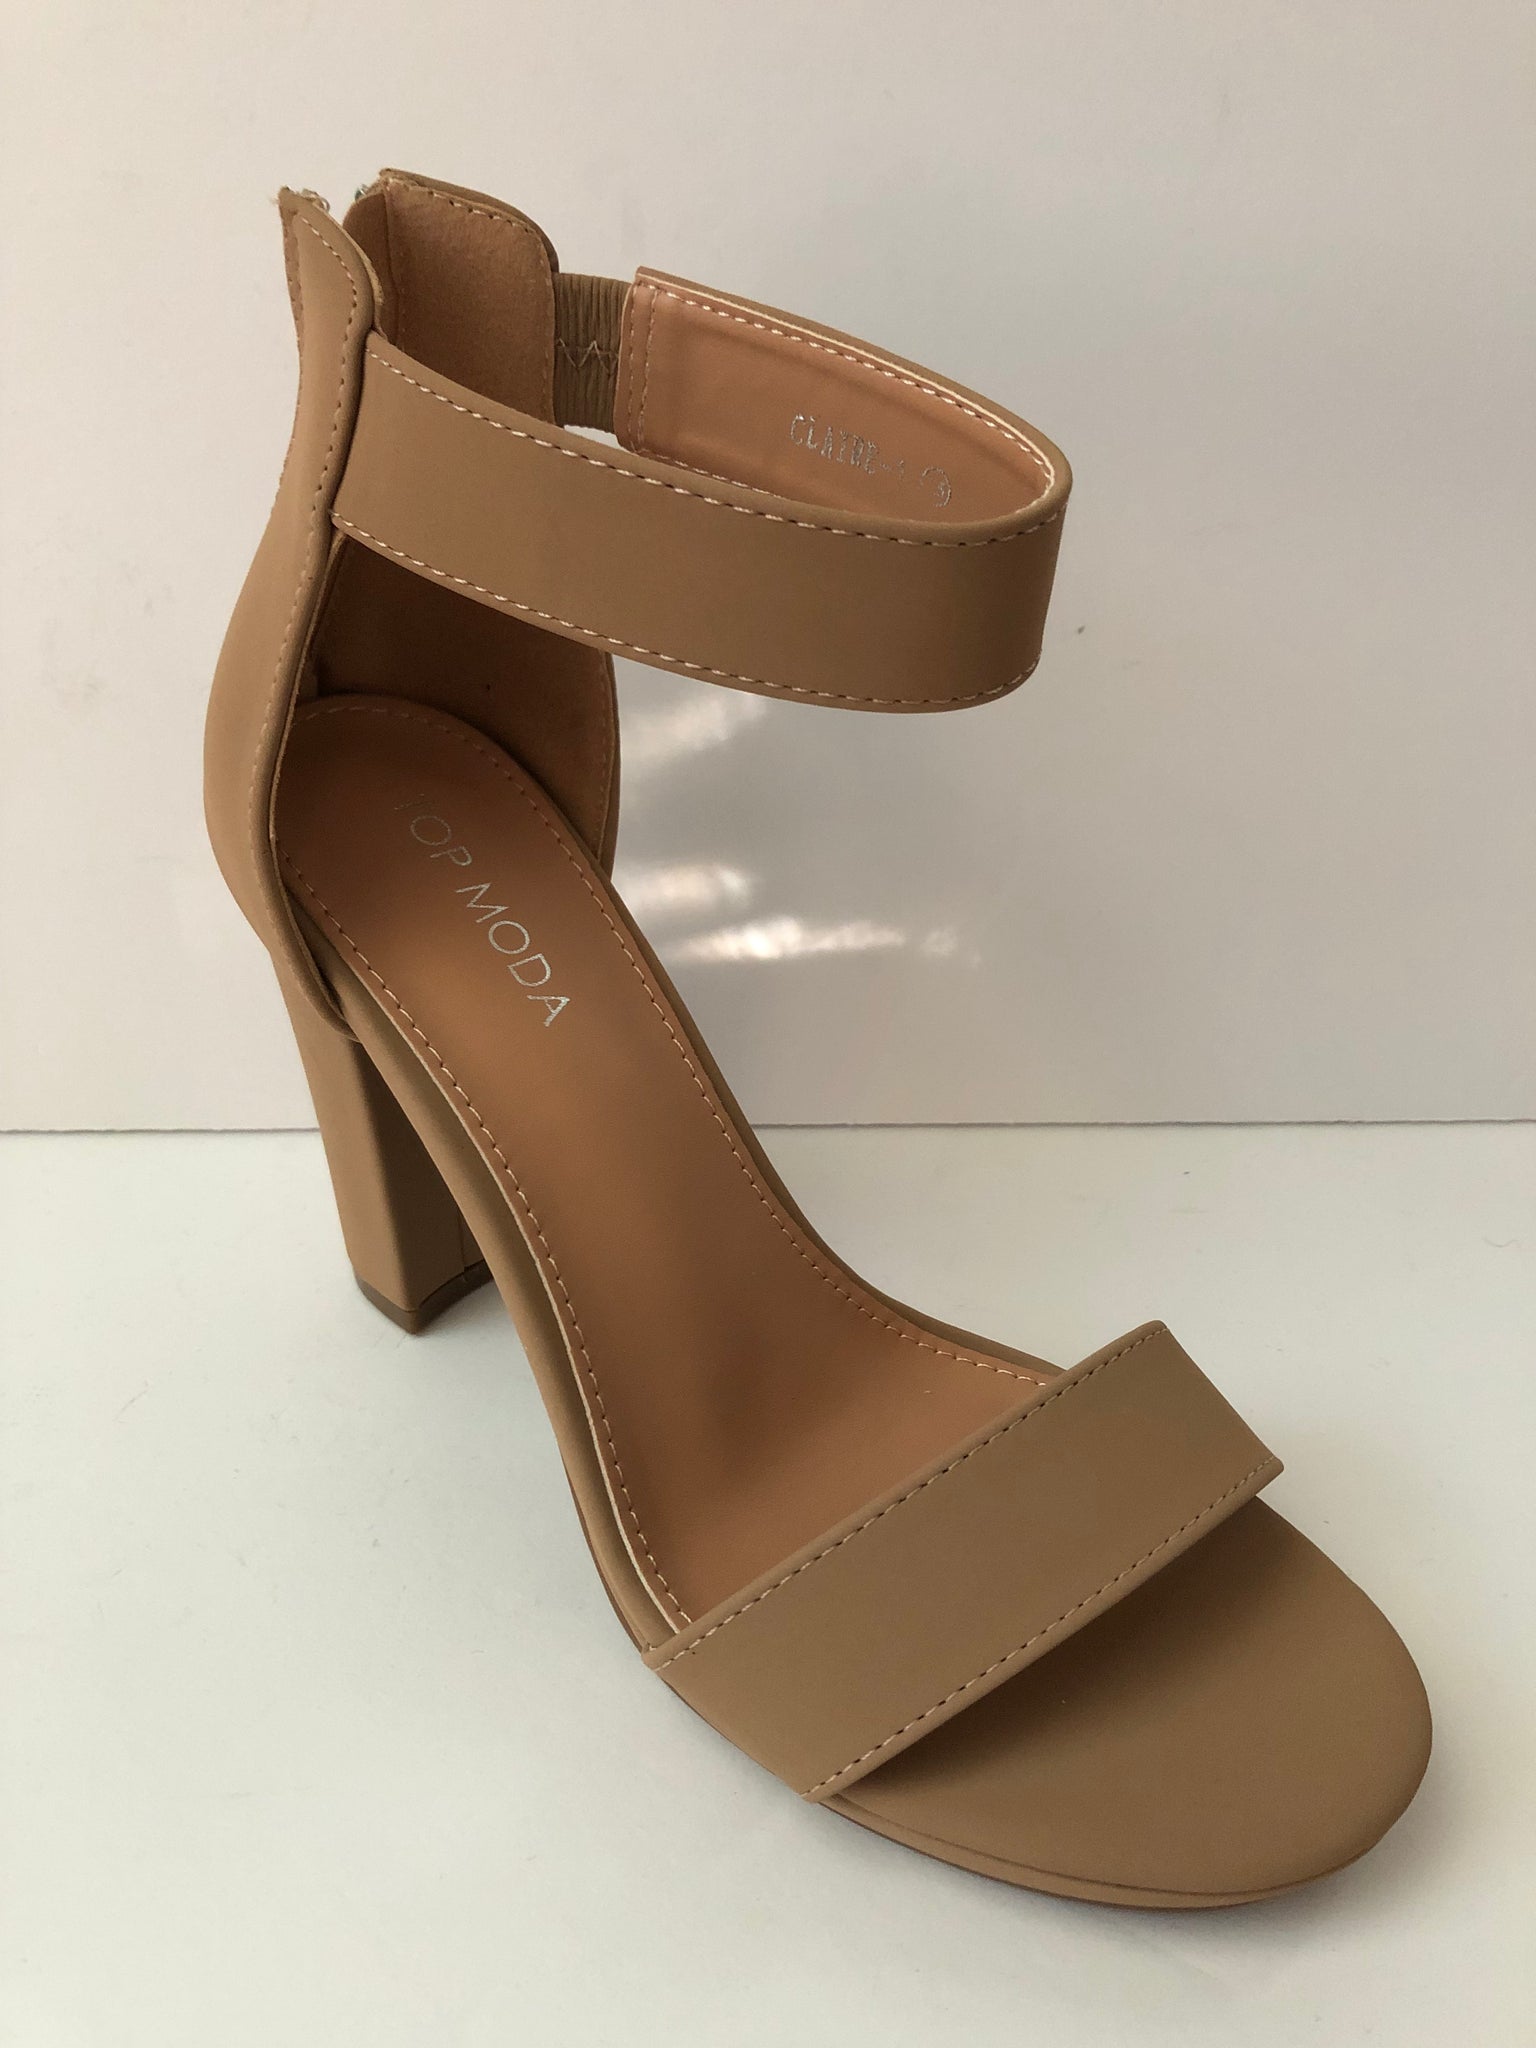 DREAM PAIRS Women's Chunky High Heel Sandals Ankle Strap Open Toe Dress  Shoes CHUNK NUDE/PU Size 7.5 - Walmart.com